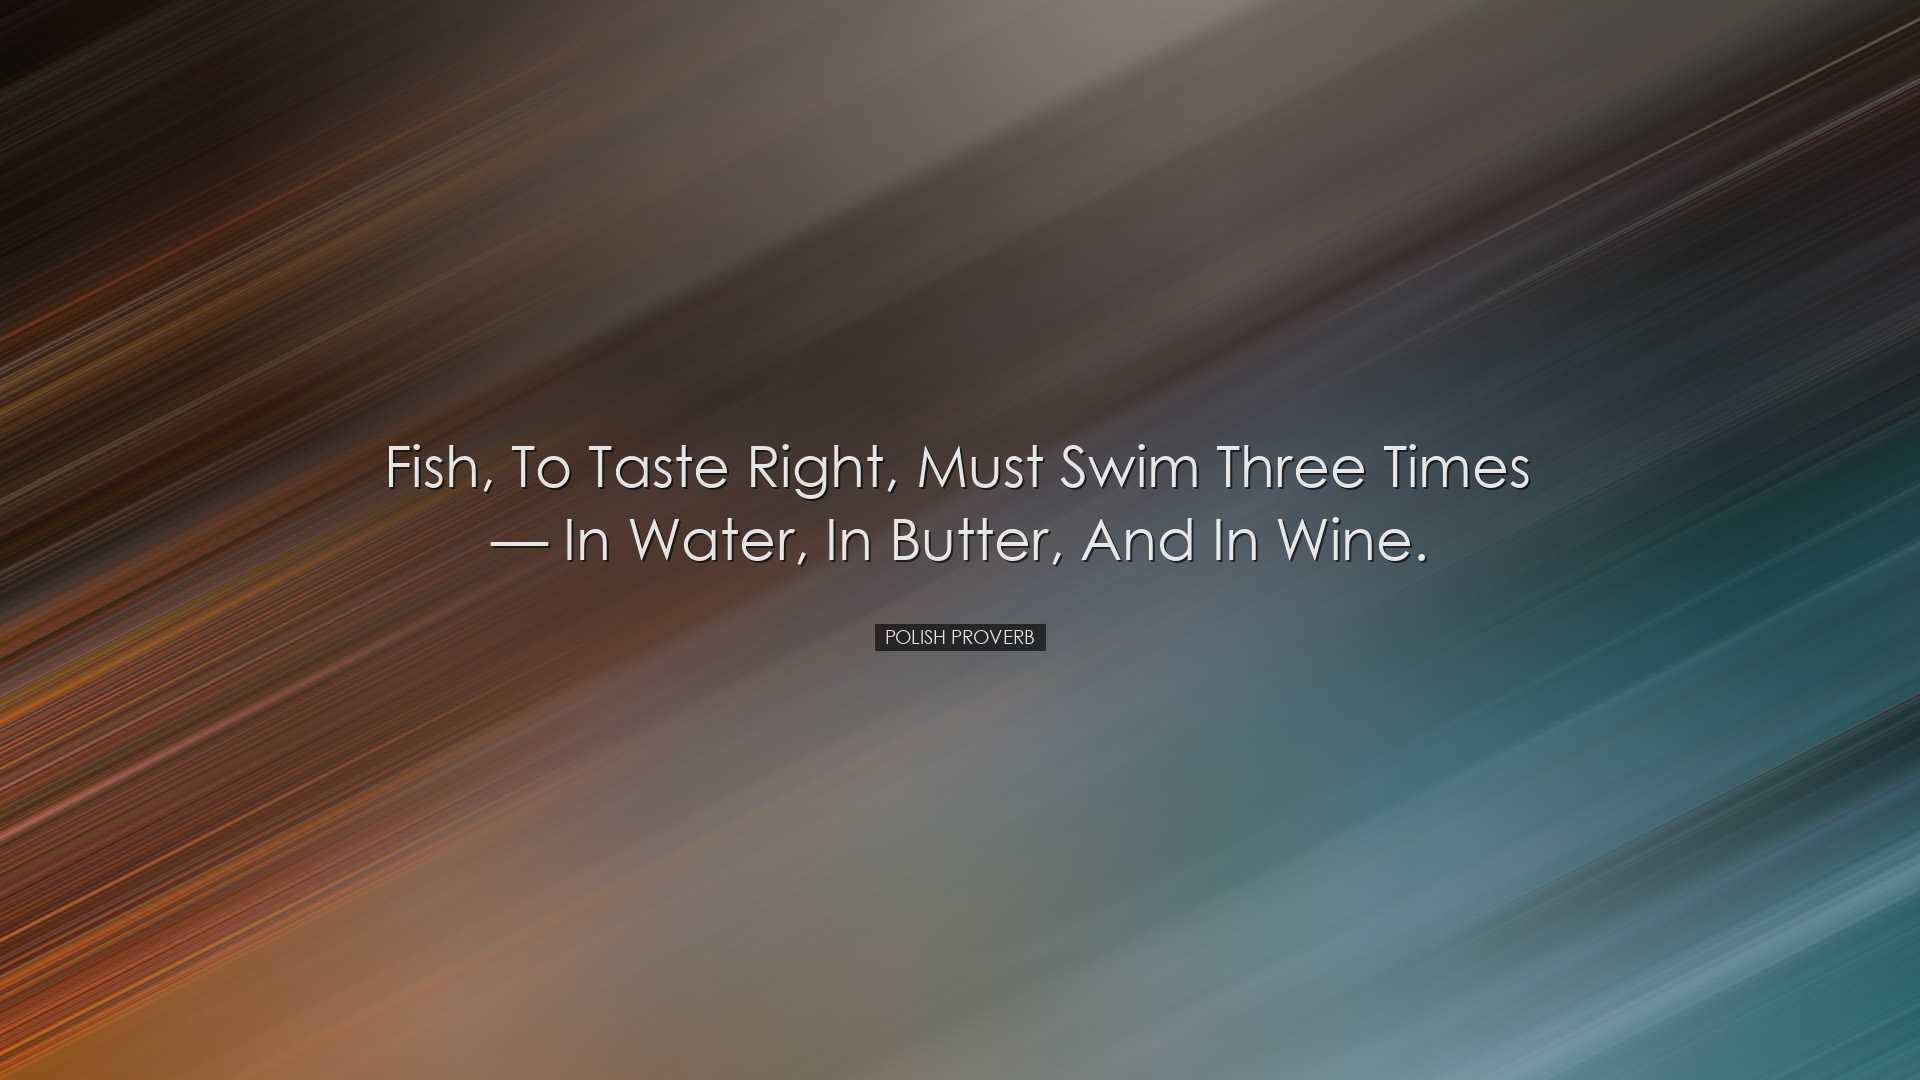 Fish, to taste right, must swim three times — in water, in b